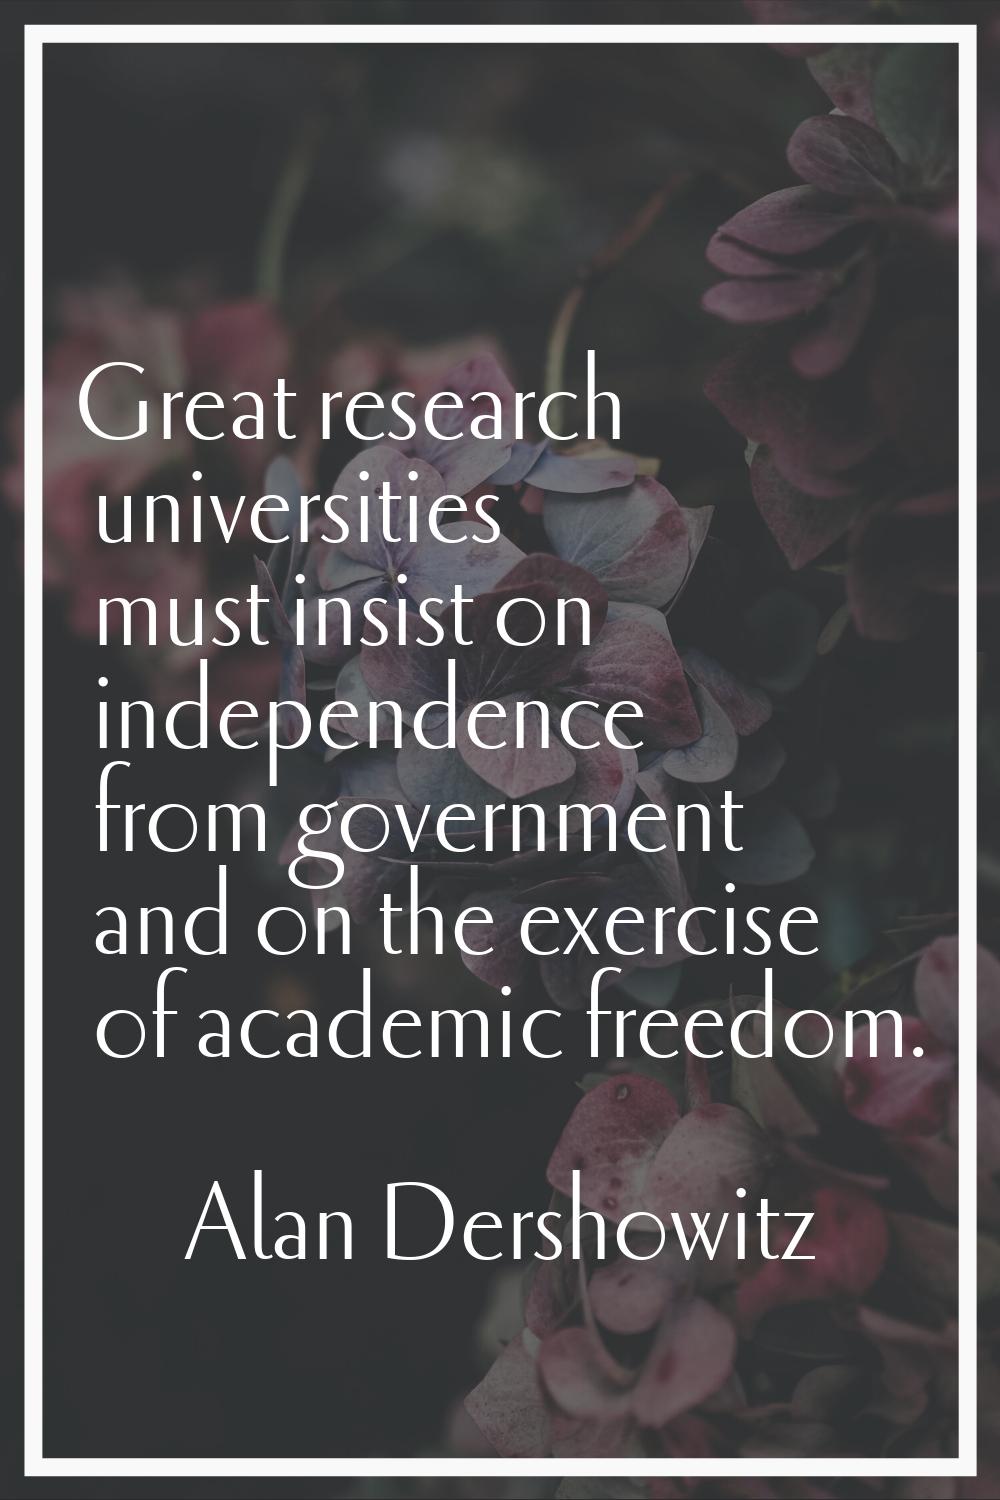 Great research universities must insist on independence from government and on the exercise of acad